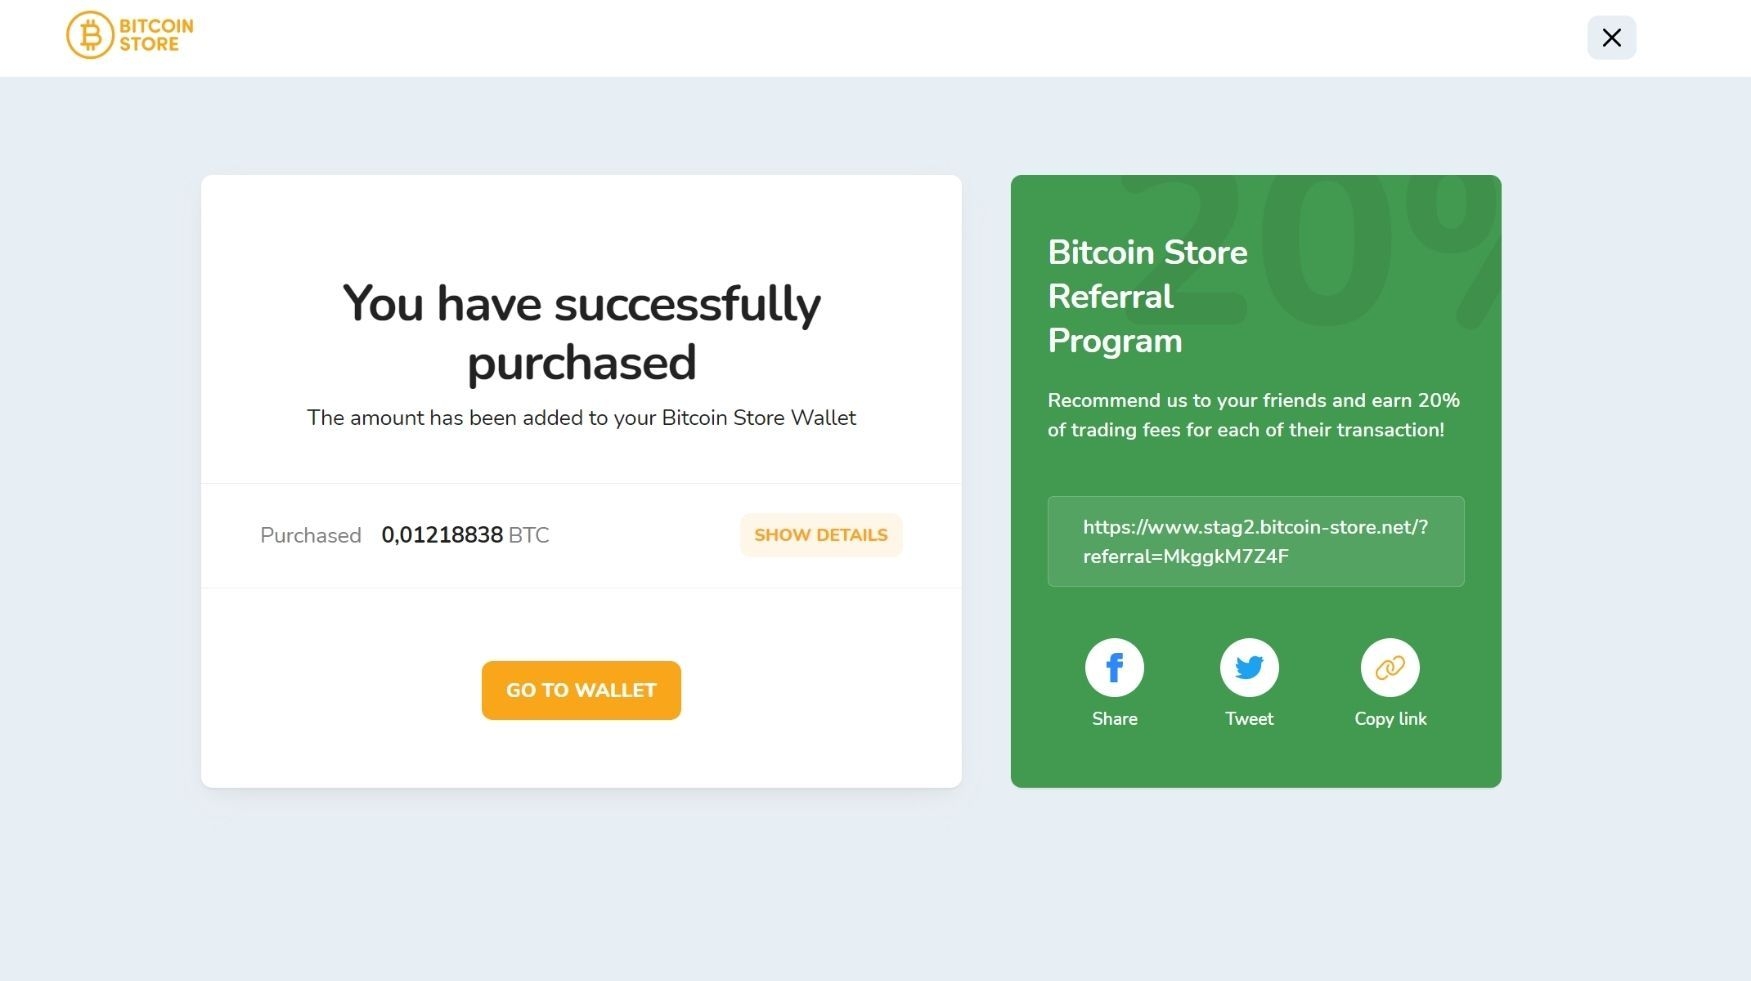 The pop-up message for the successful cryptocurrency purchase on the Bitcoin Store platform.